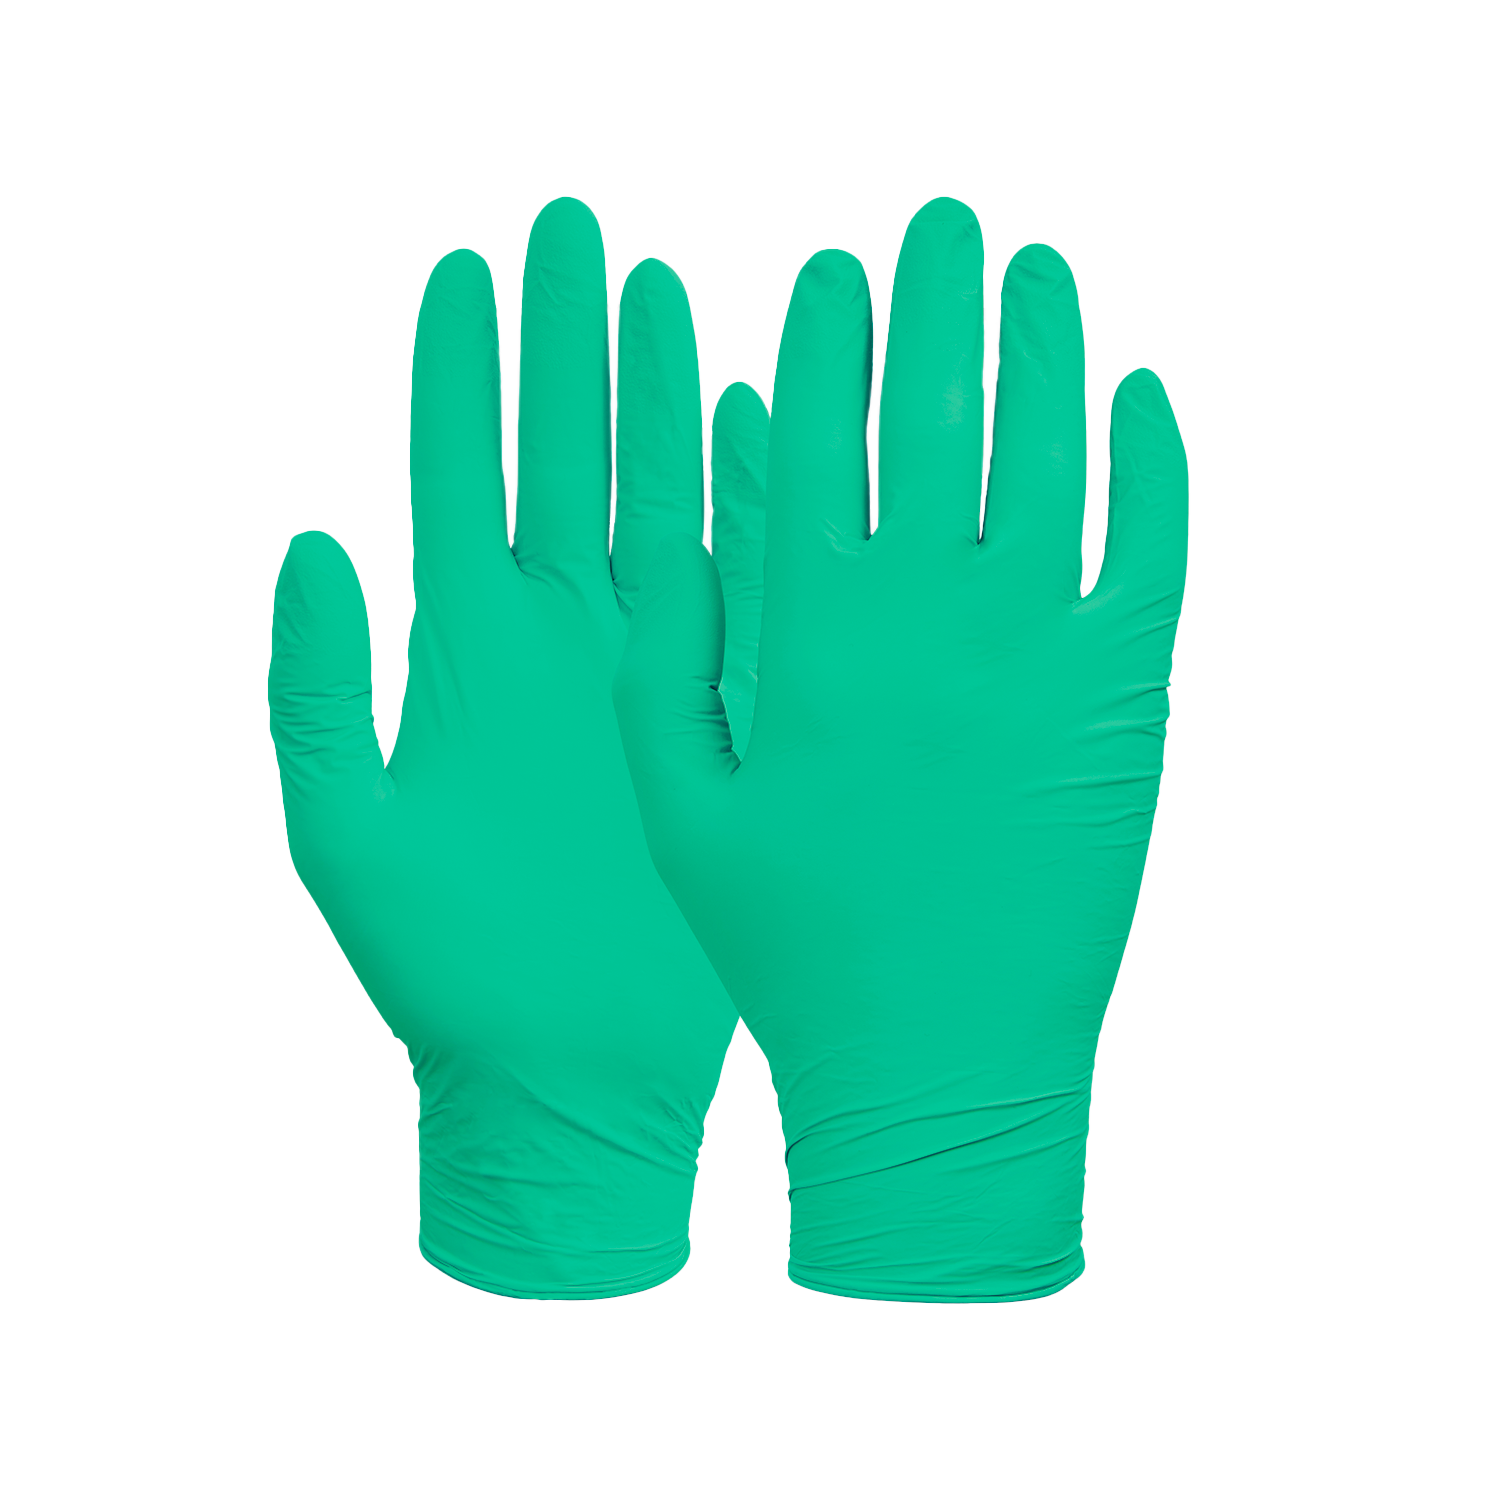 NORSE Disposable Green Green disposable nitrile gloves - size 9/L